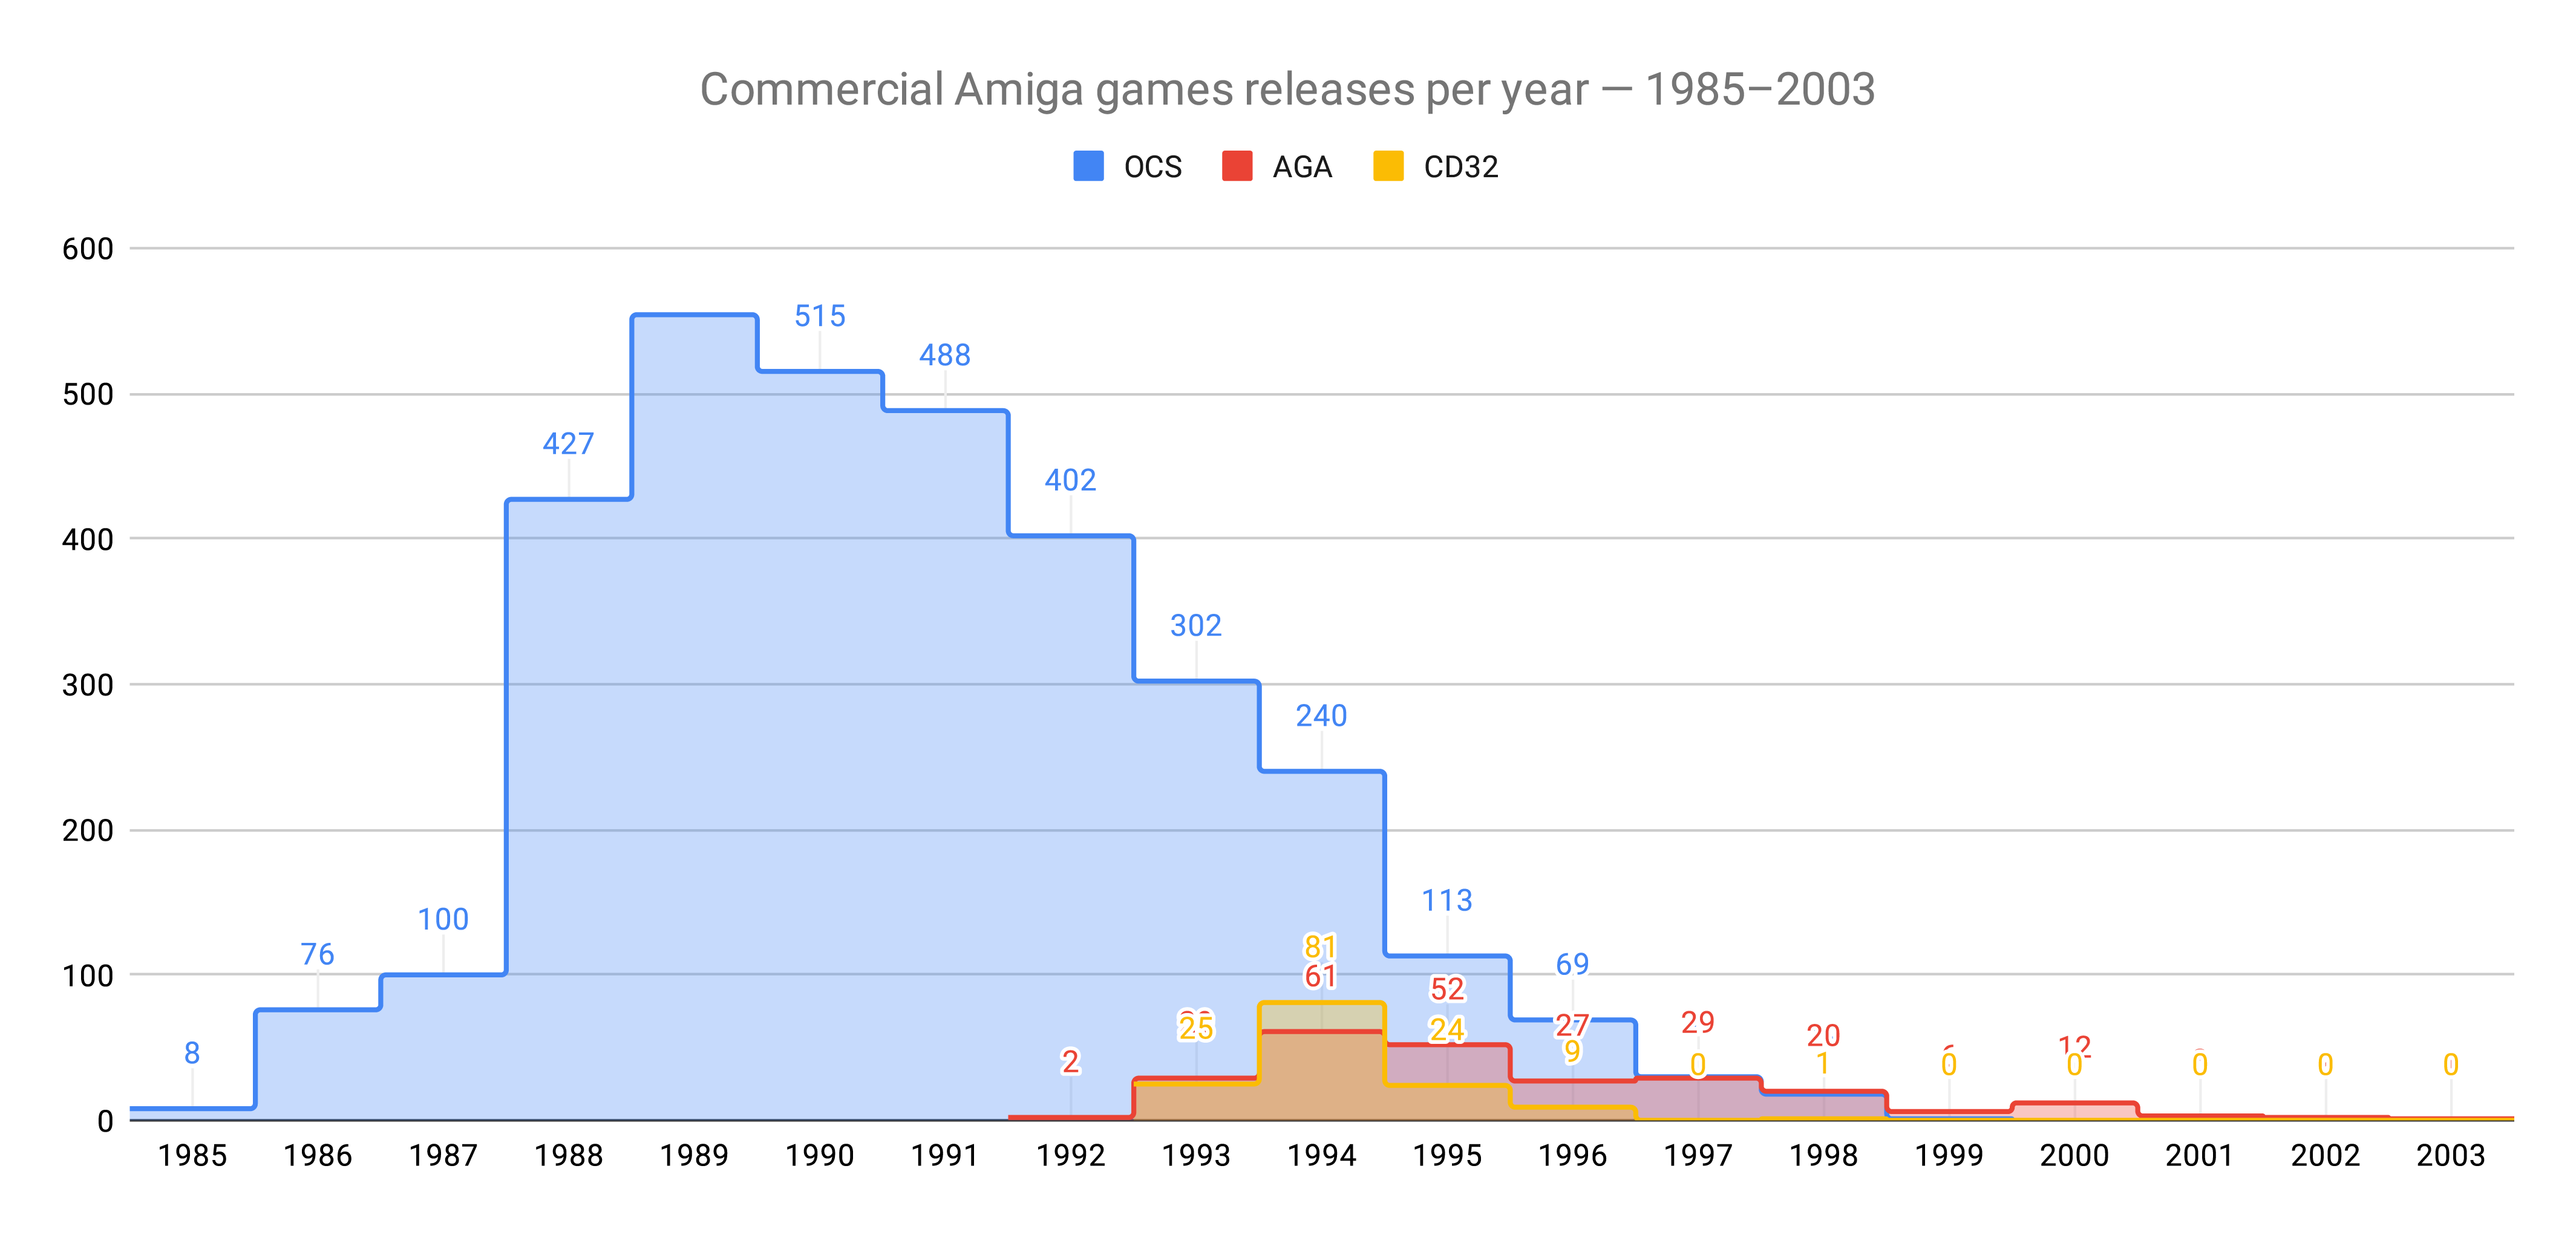 Commercial Amiga game releases per year between 1985-2003